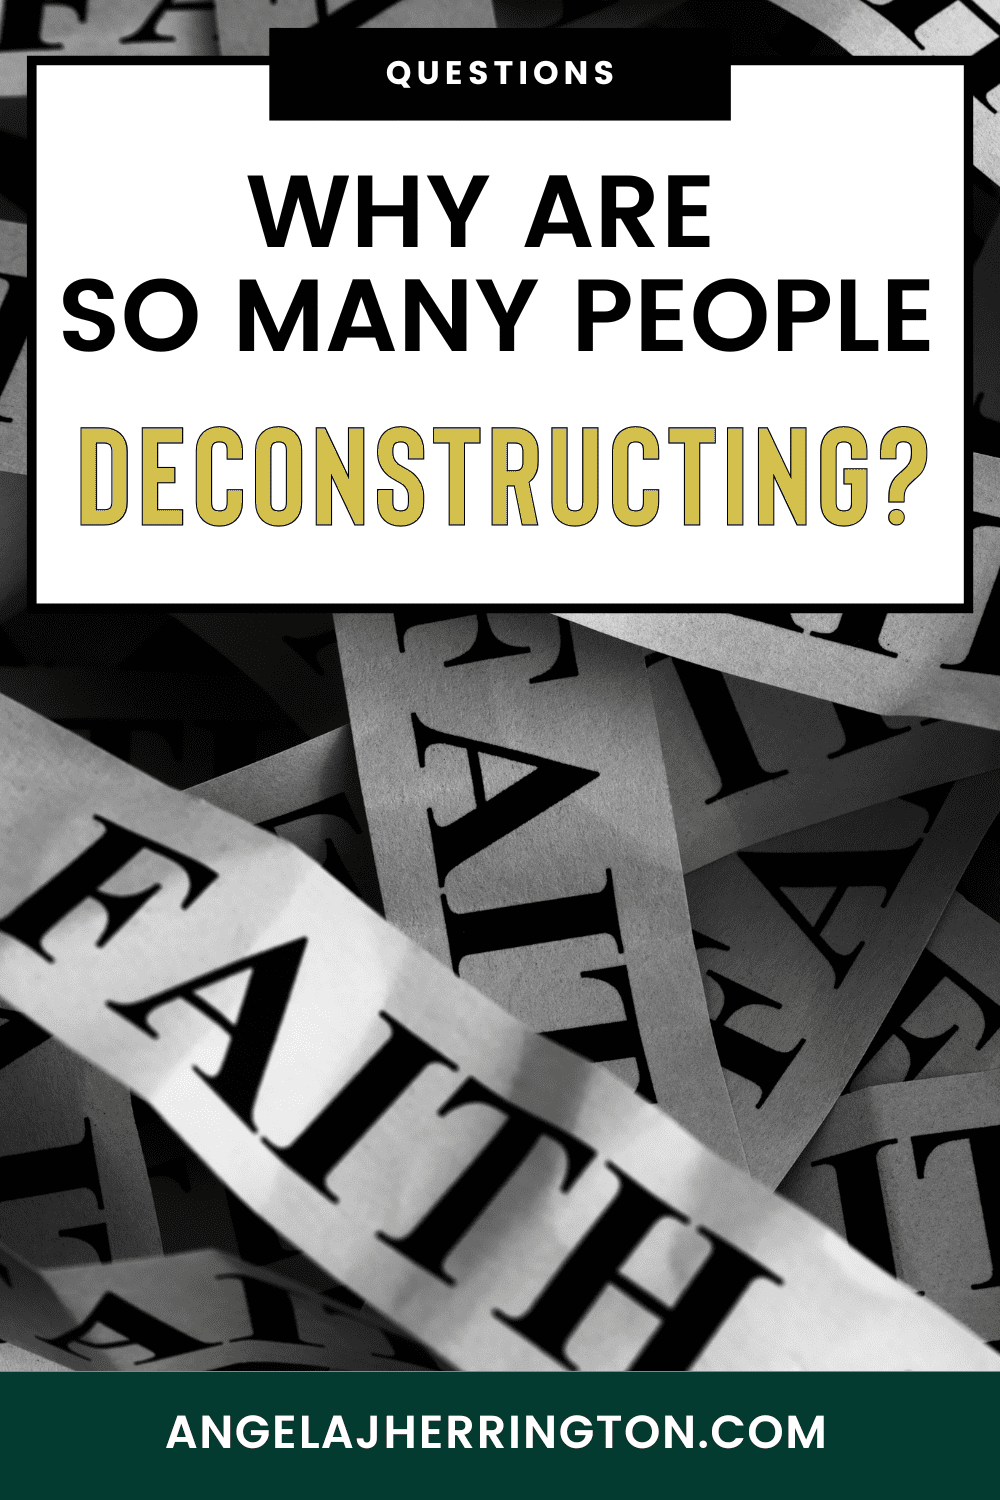 Why are so many people deconstructing written on a background of faith written on many strips of paper.